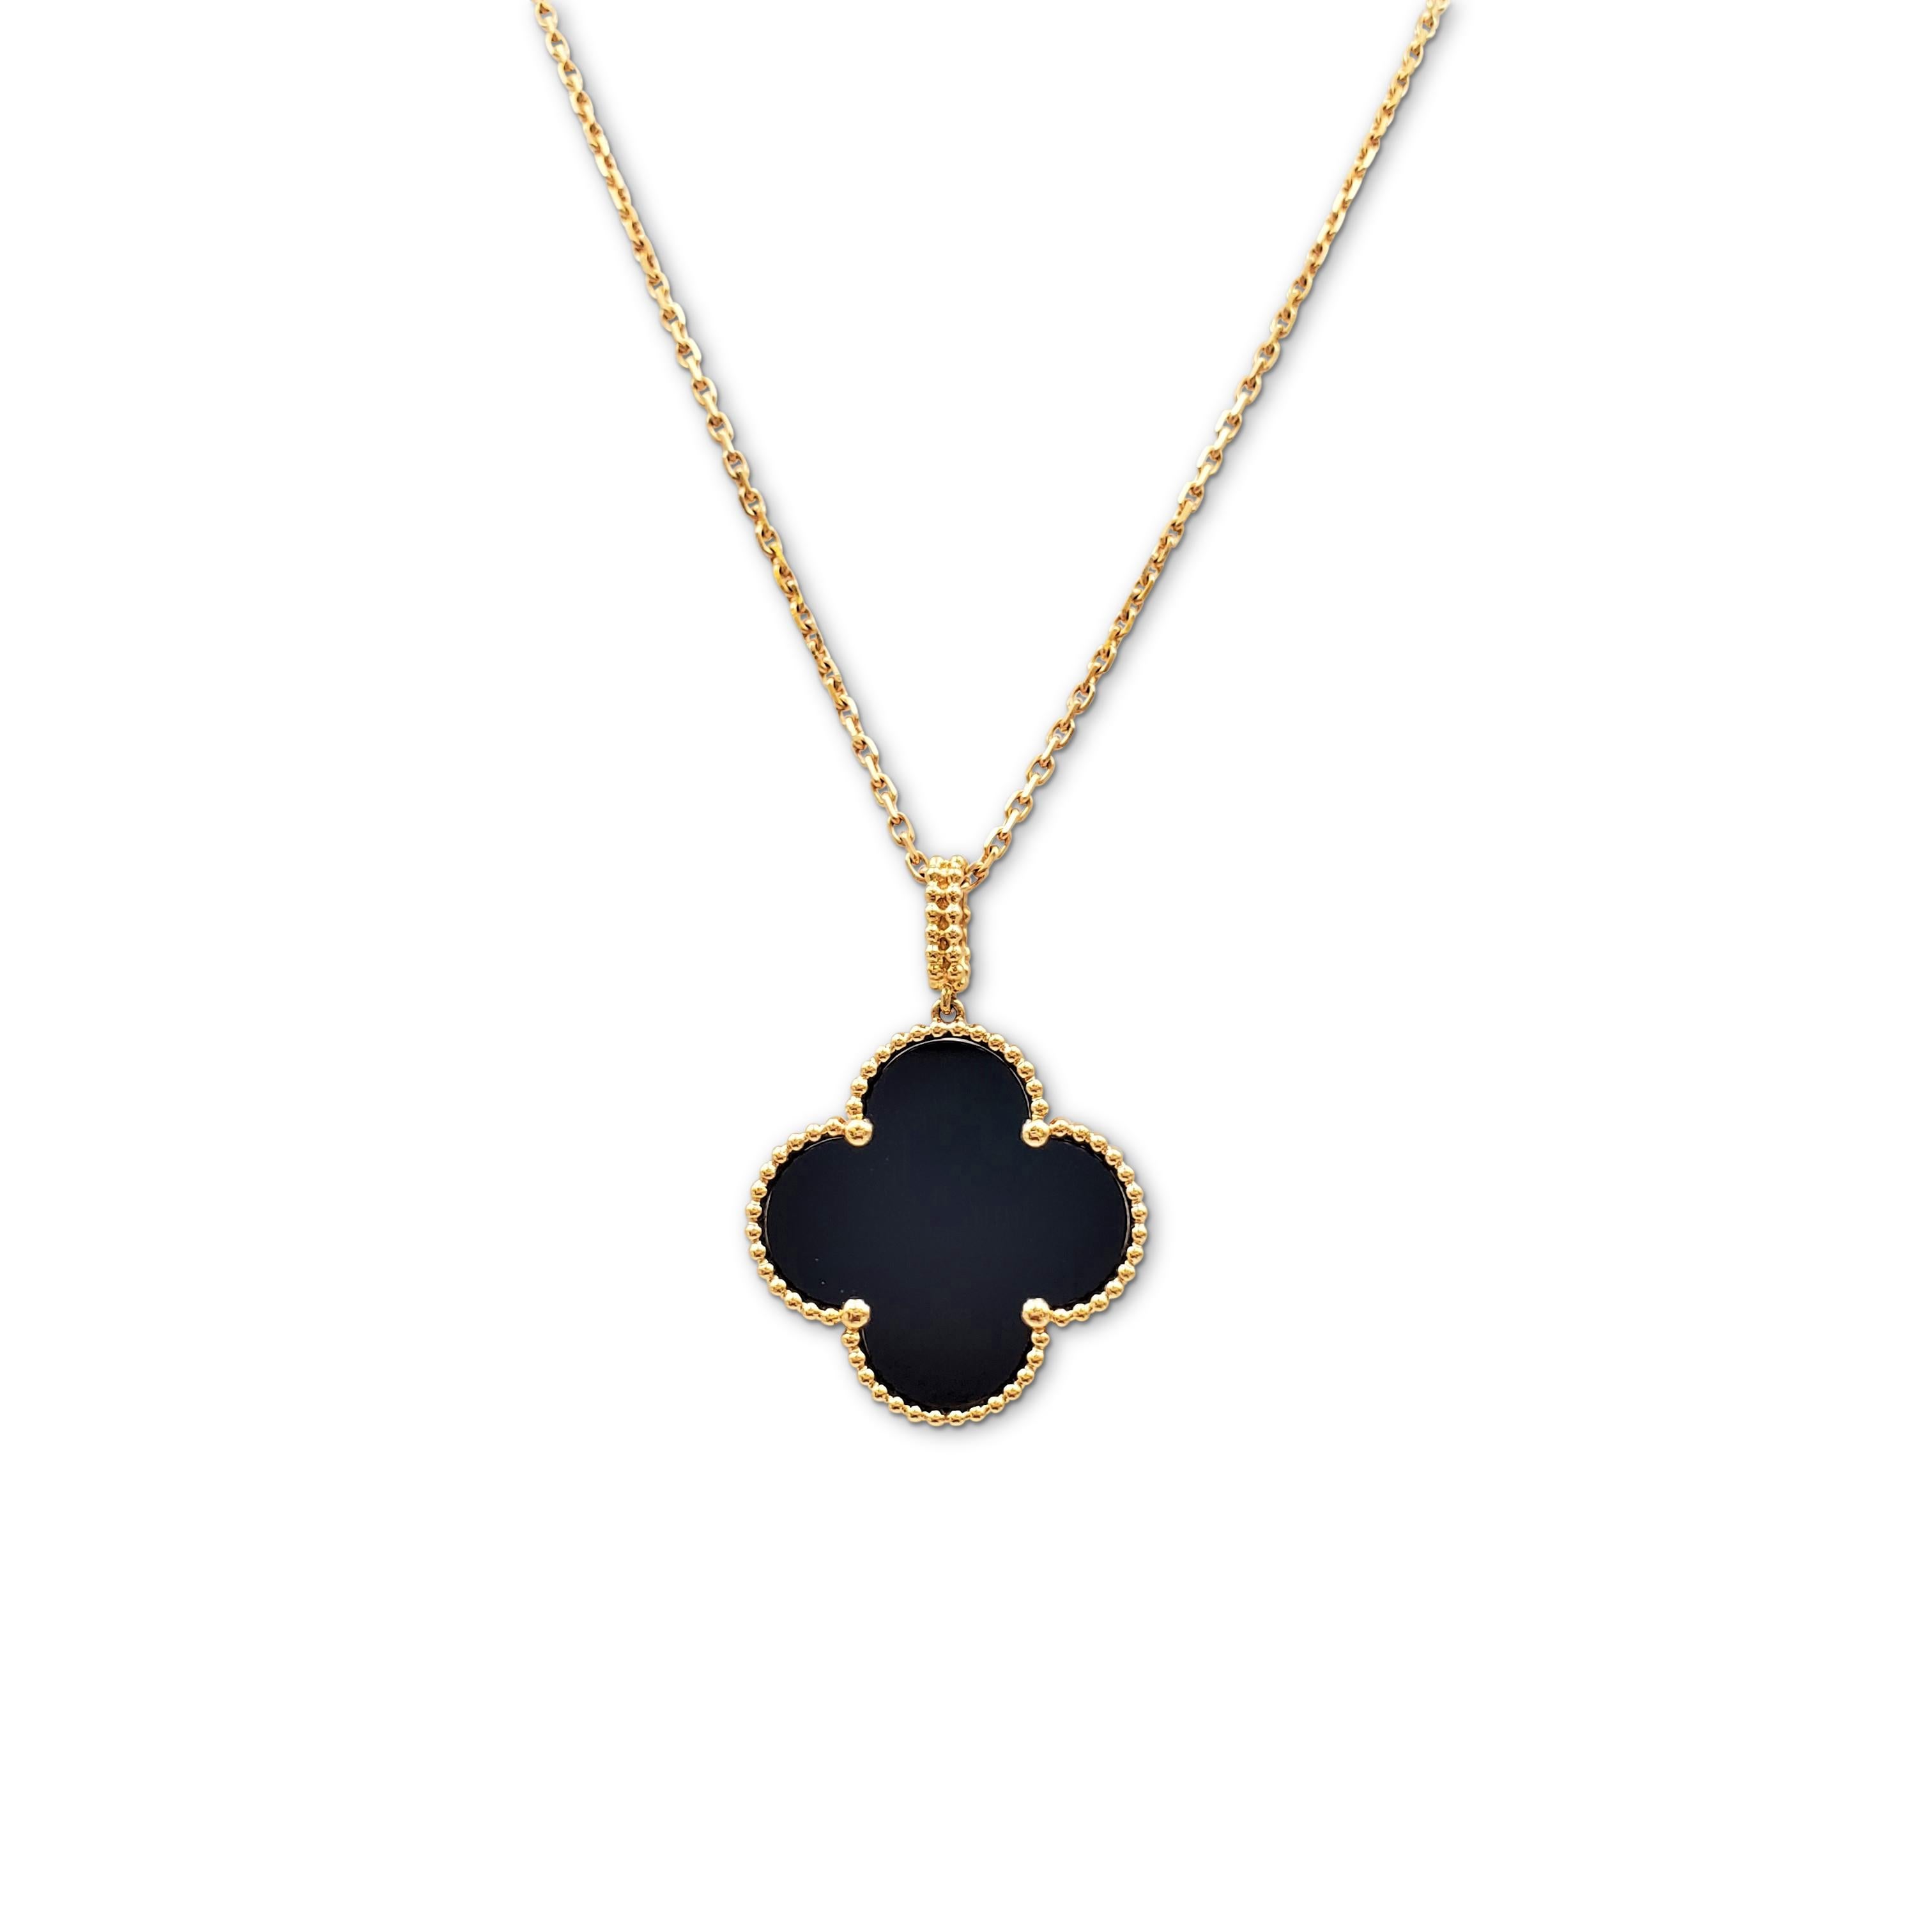 Authentic Van Cleef & Arpels 'Magic Alhambra' pendant necklace crafted in 18 karat yellow gold features a single cloverleaf inspired motif in onyx. Signed VCA, Au750, with serial number and hallmark. The necklace is presented with the original box